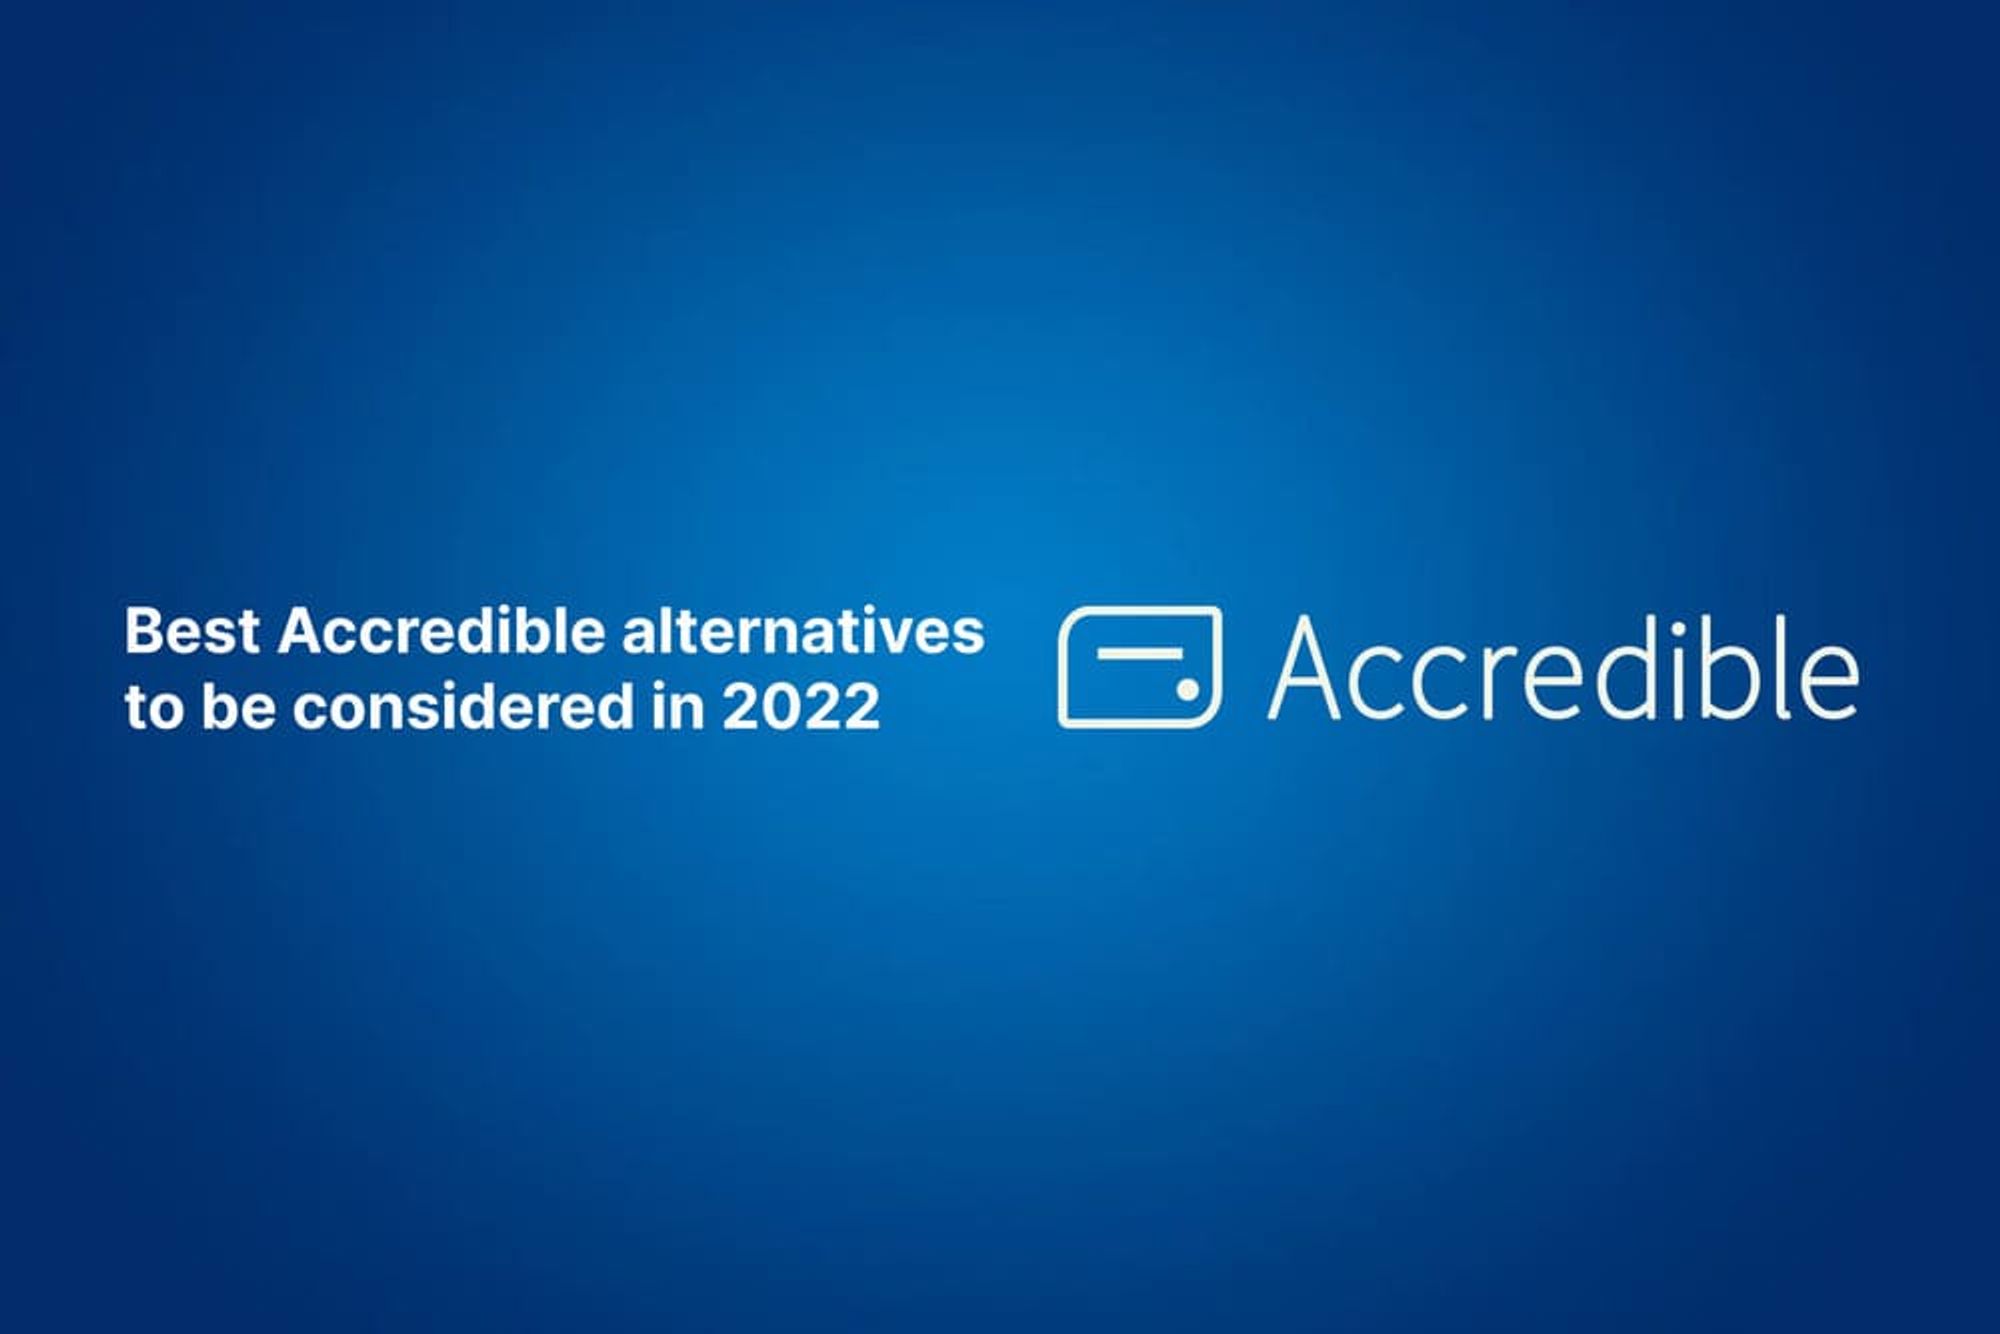 Best Accredible alternatives to be considered in 2022